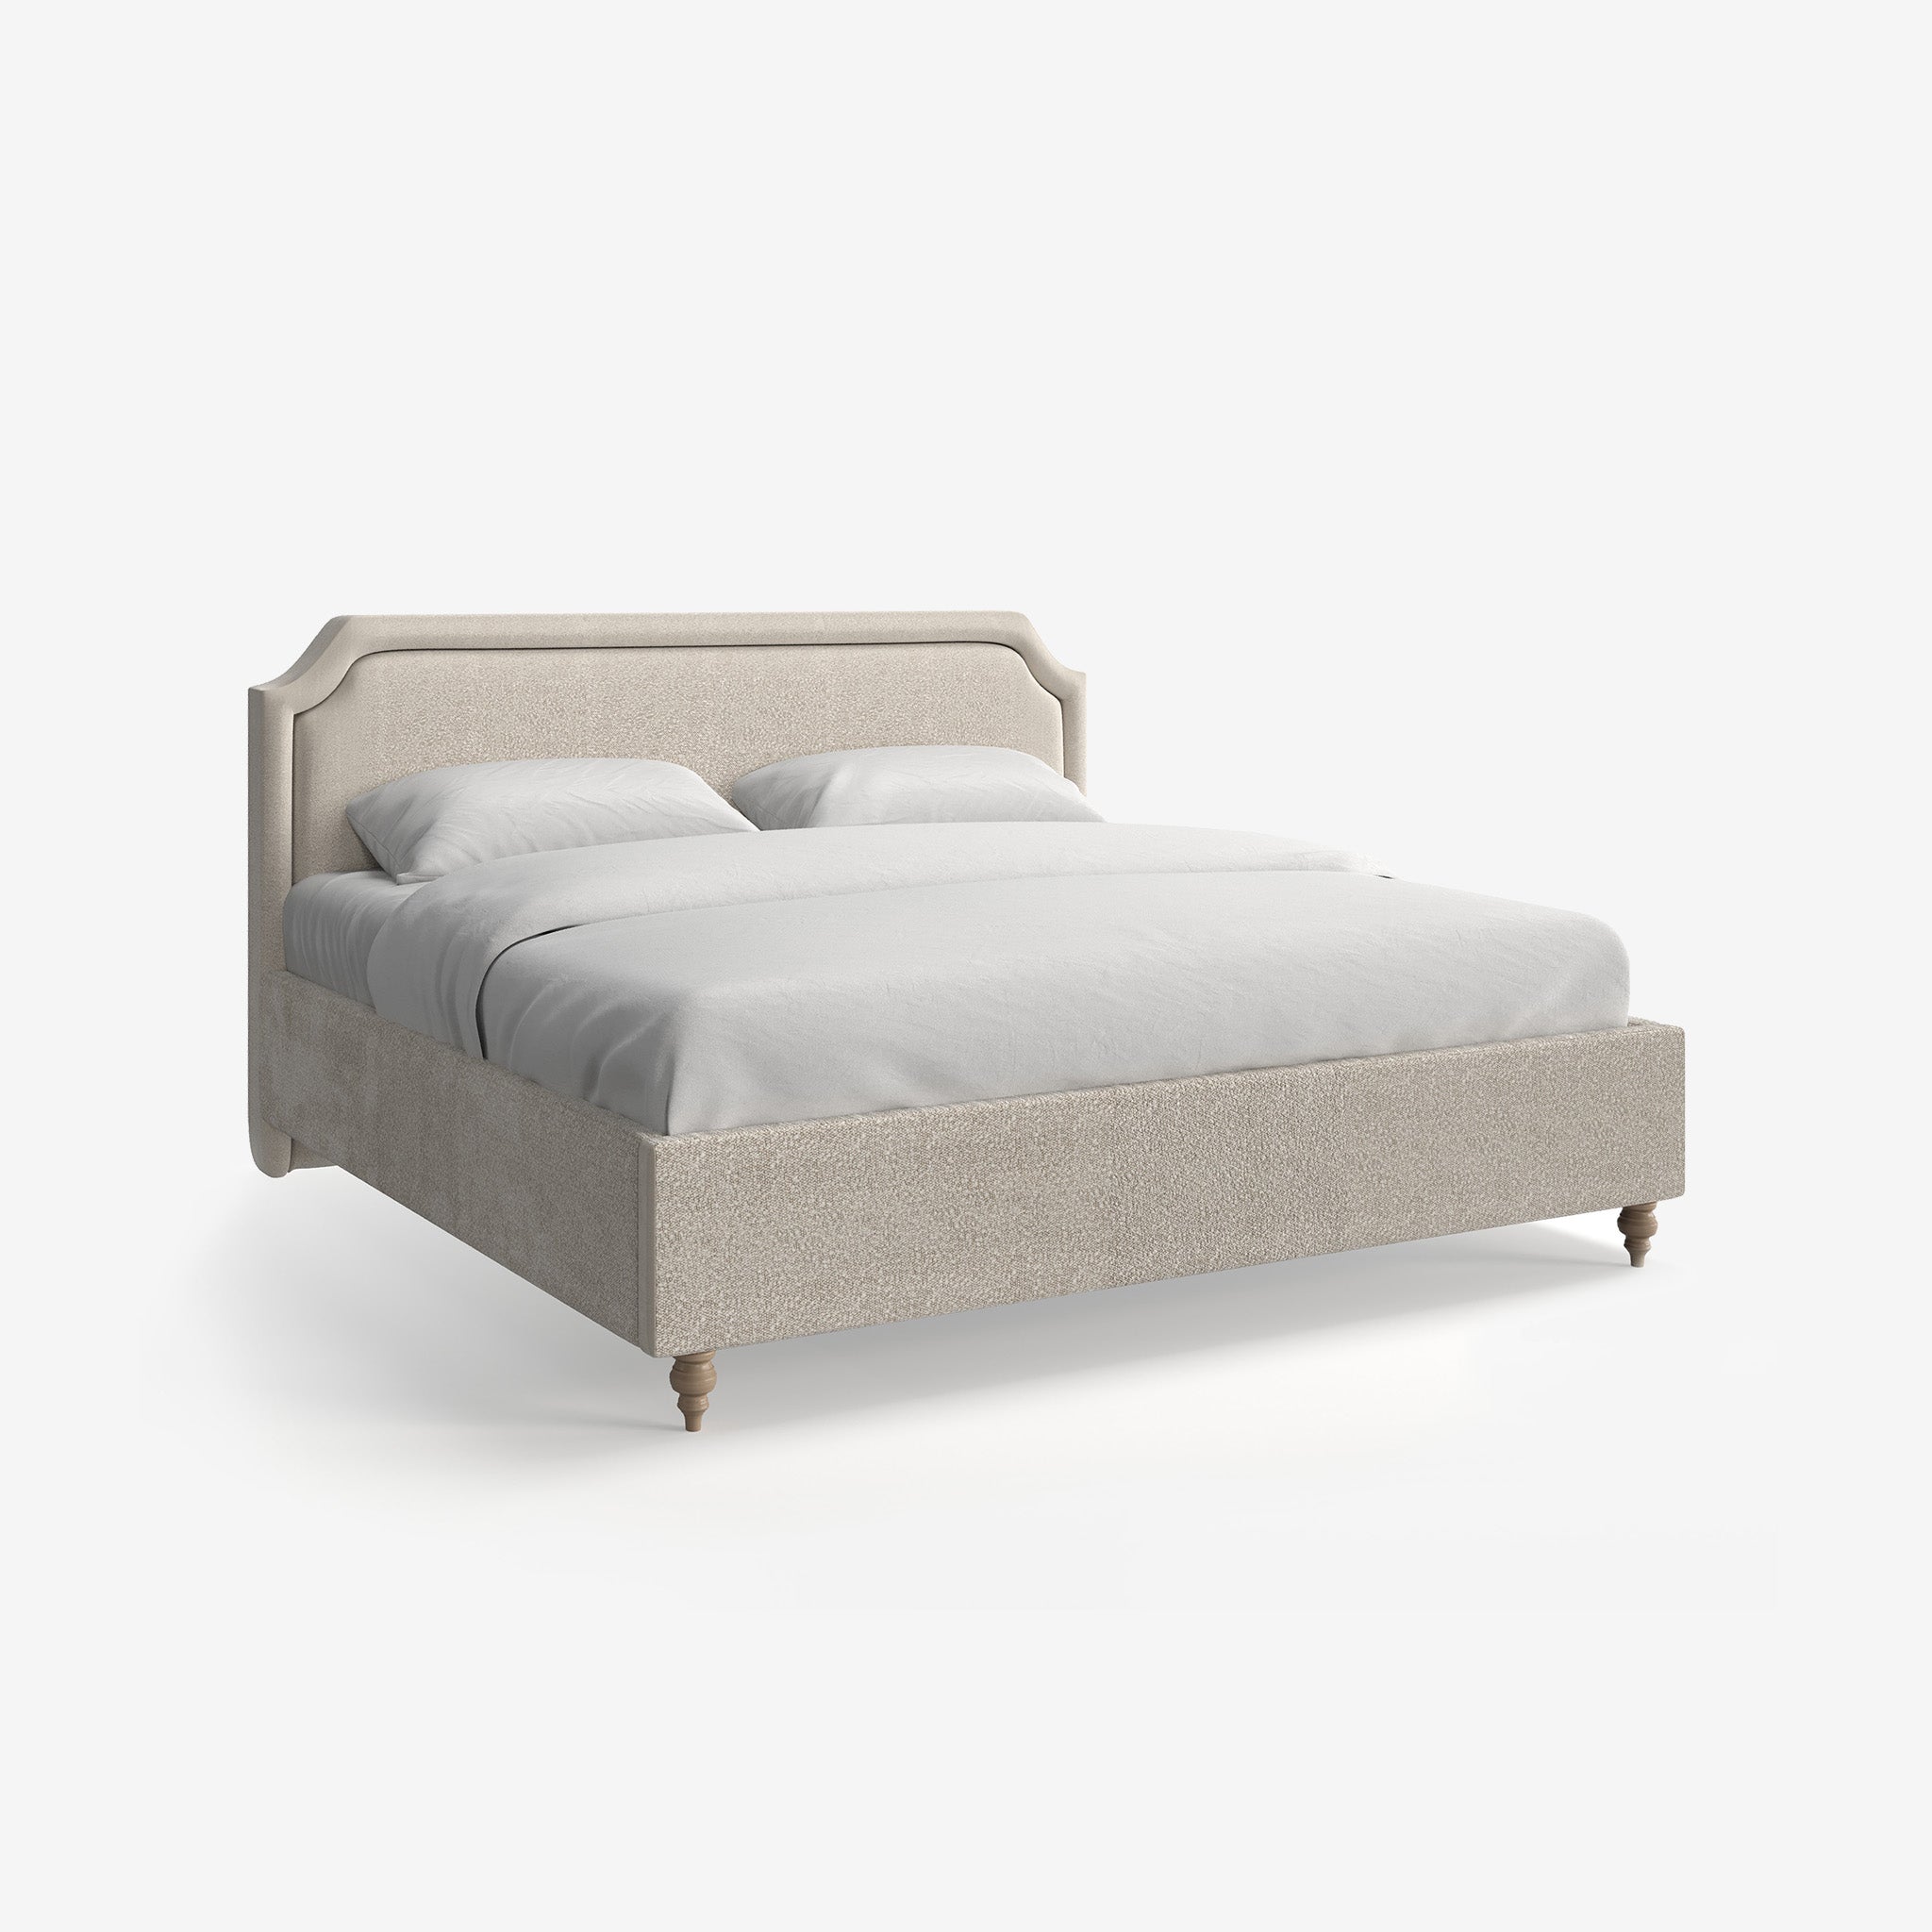 Haley Beige Boucle Upholstered Bed with Fluted Edge Headbaord and end-lift Ottoman Storage, Contemporary Interiors, Online Shopping, Craftsmanship, Wooden feet, Bazaar